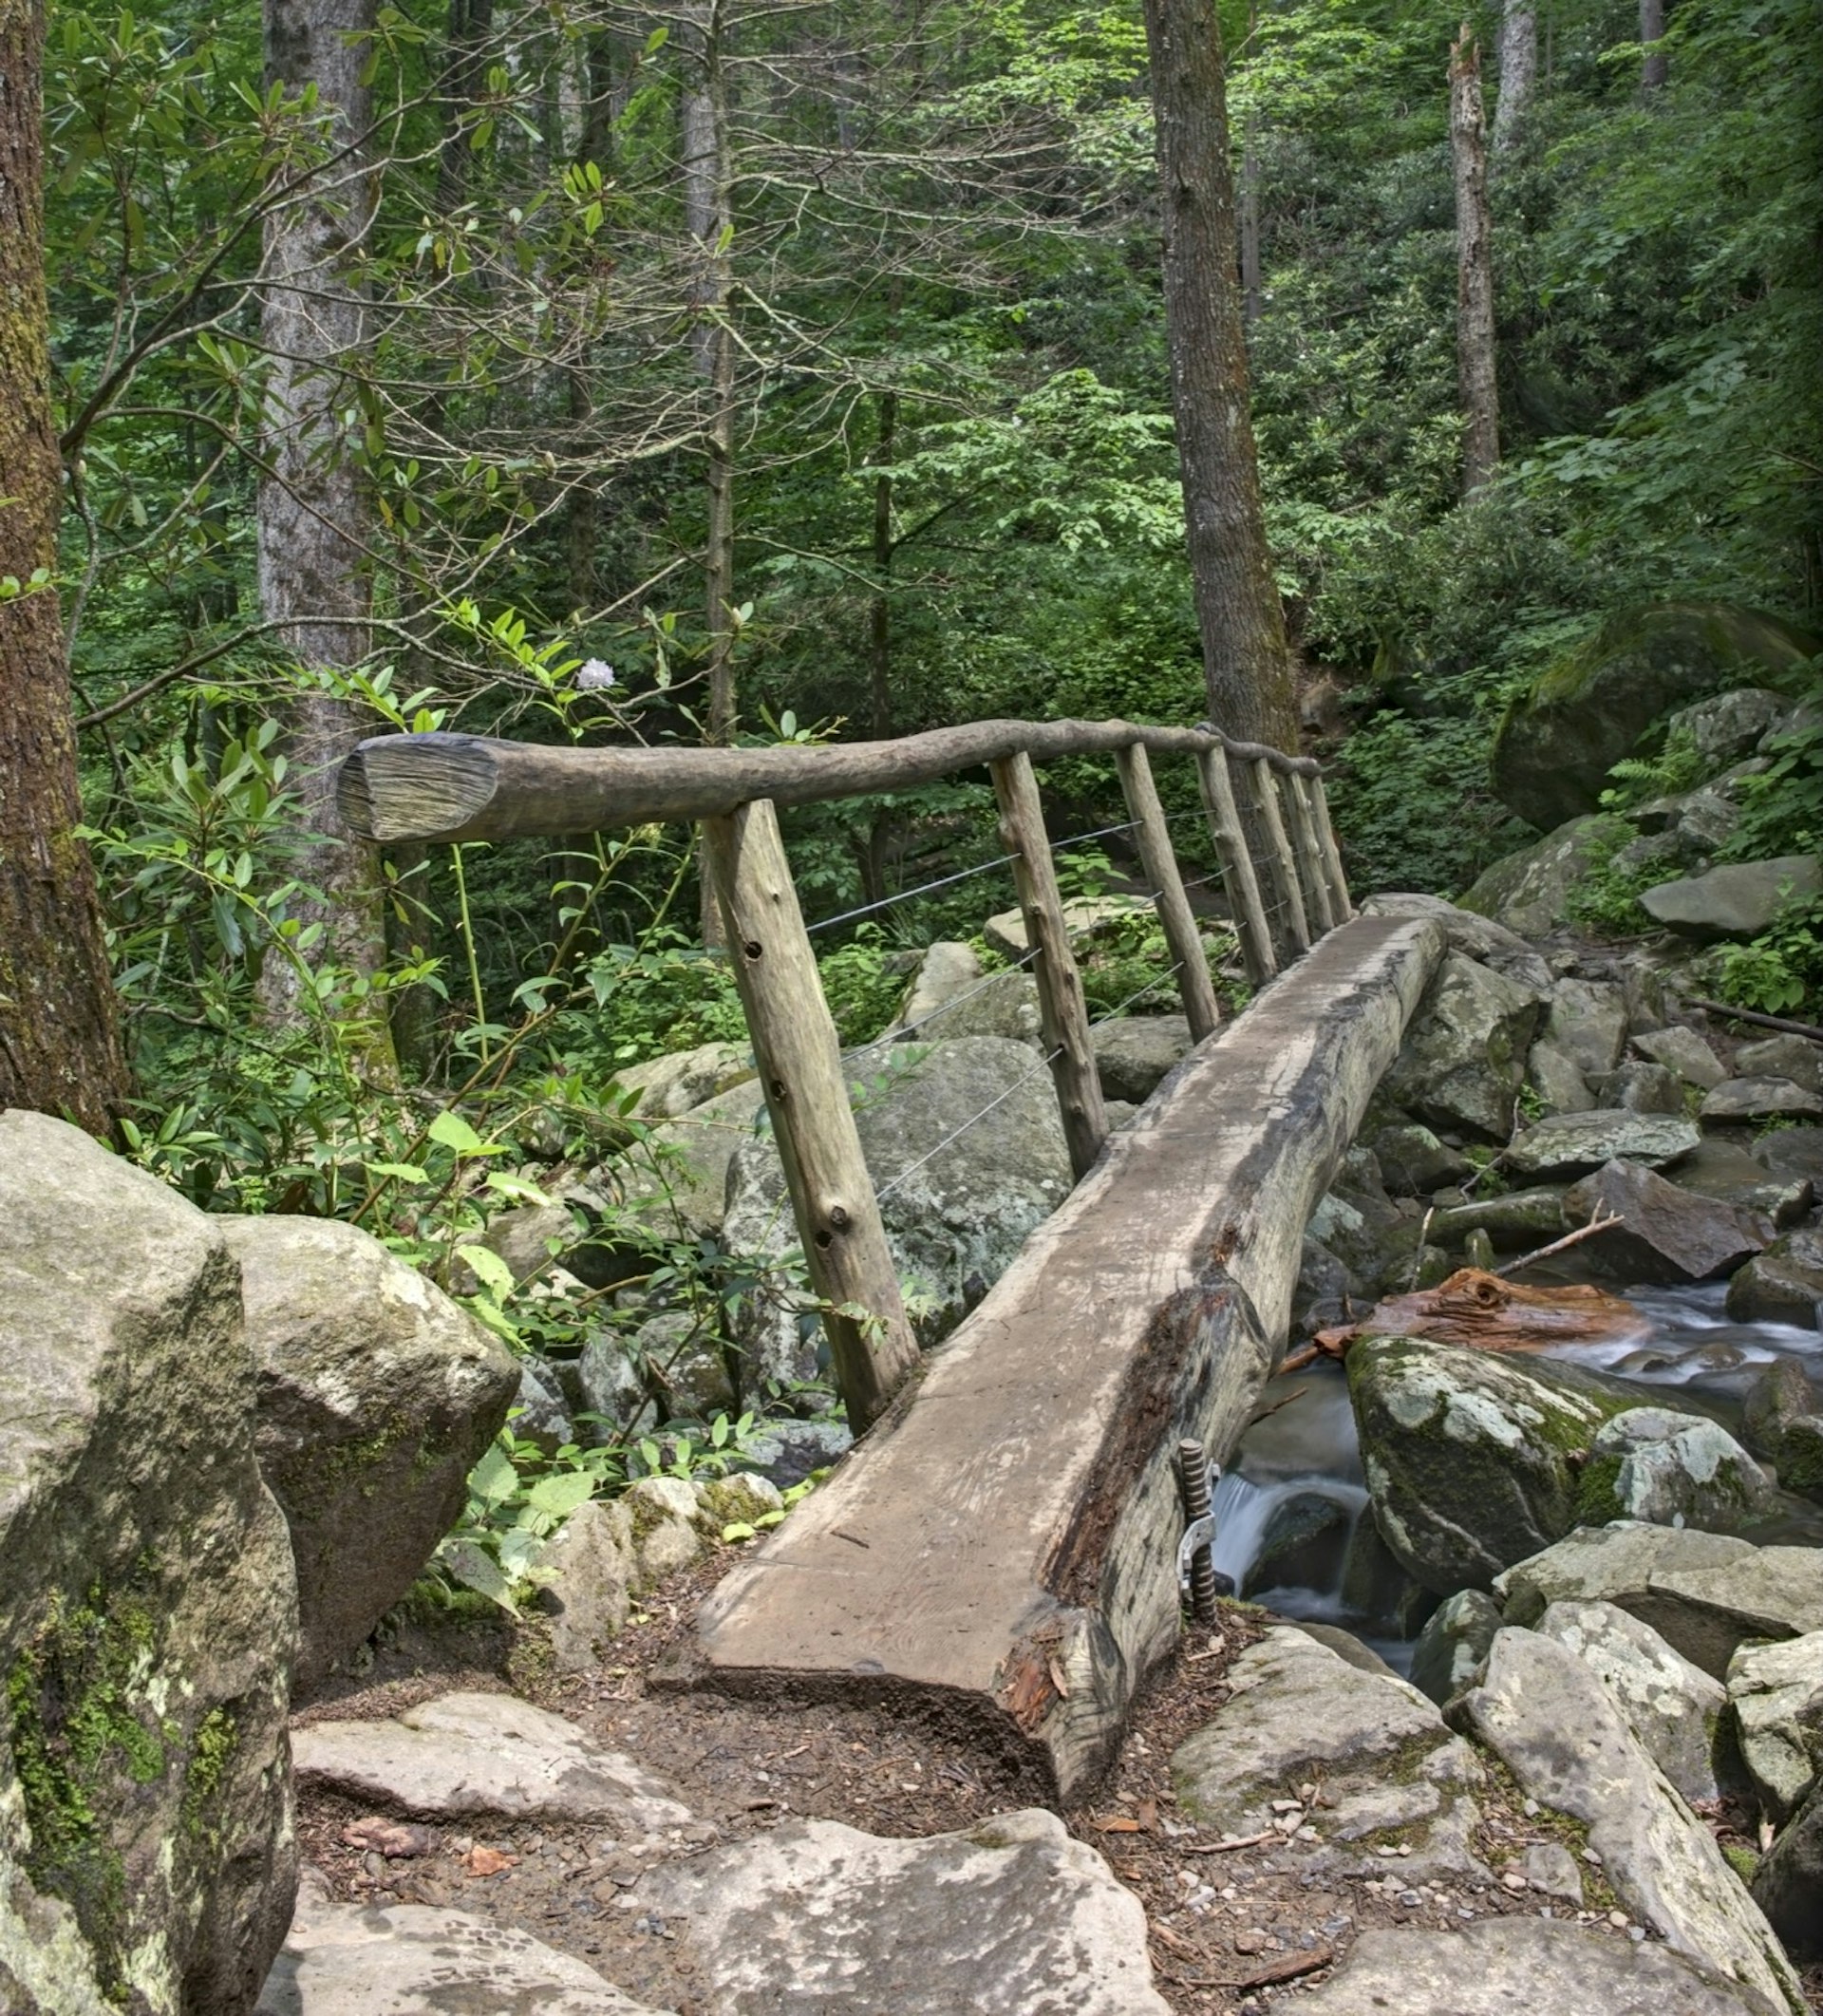 A log footbridge crosses a stream in a green forest in the Great Smoky Mountains National Park in Tennessee